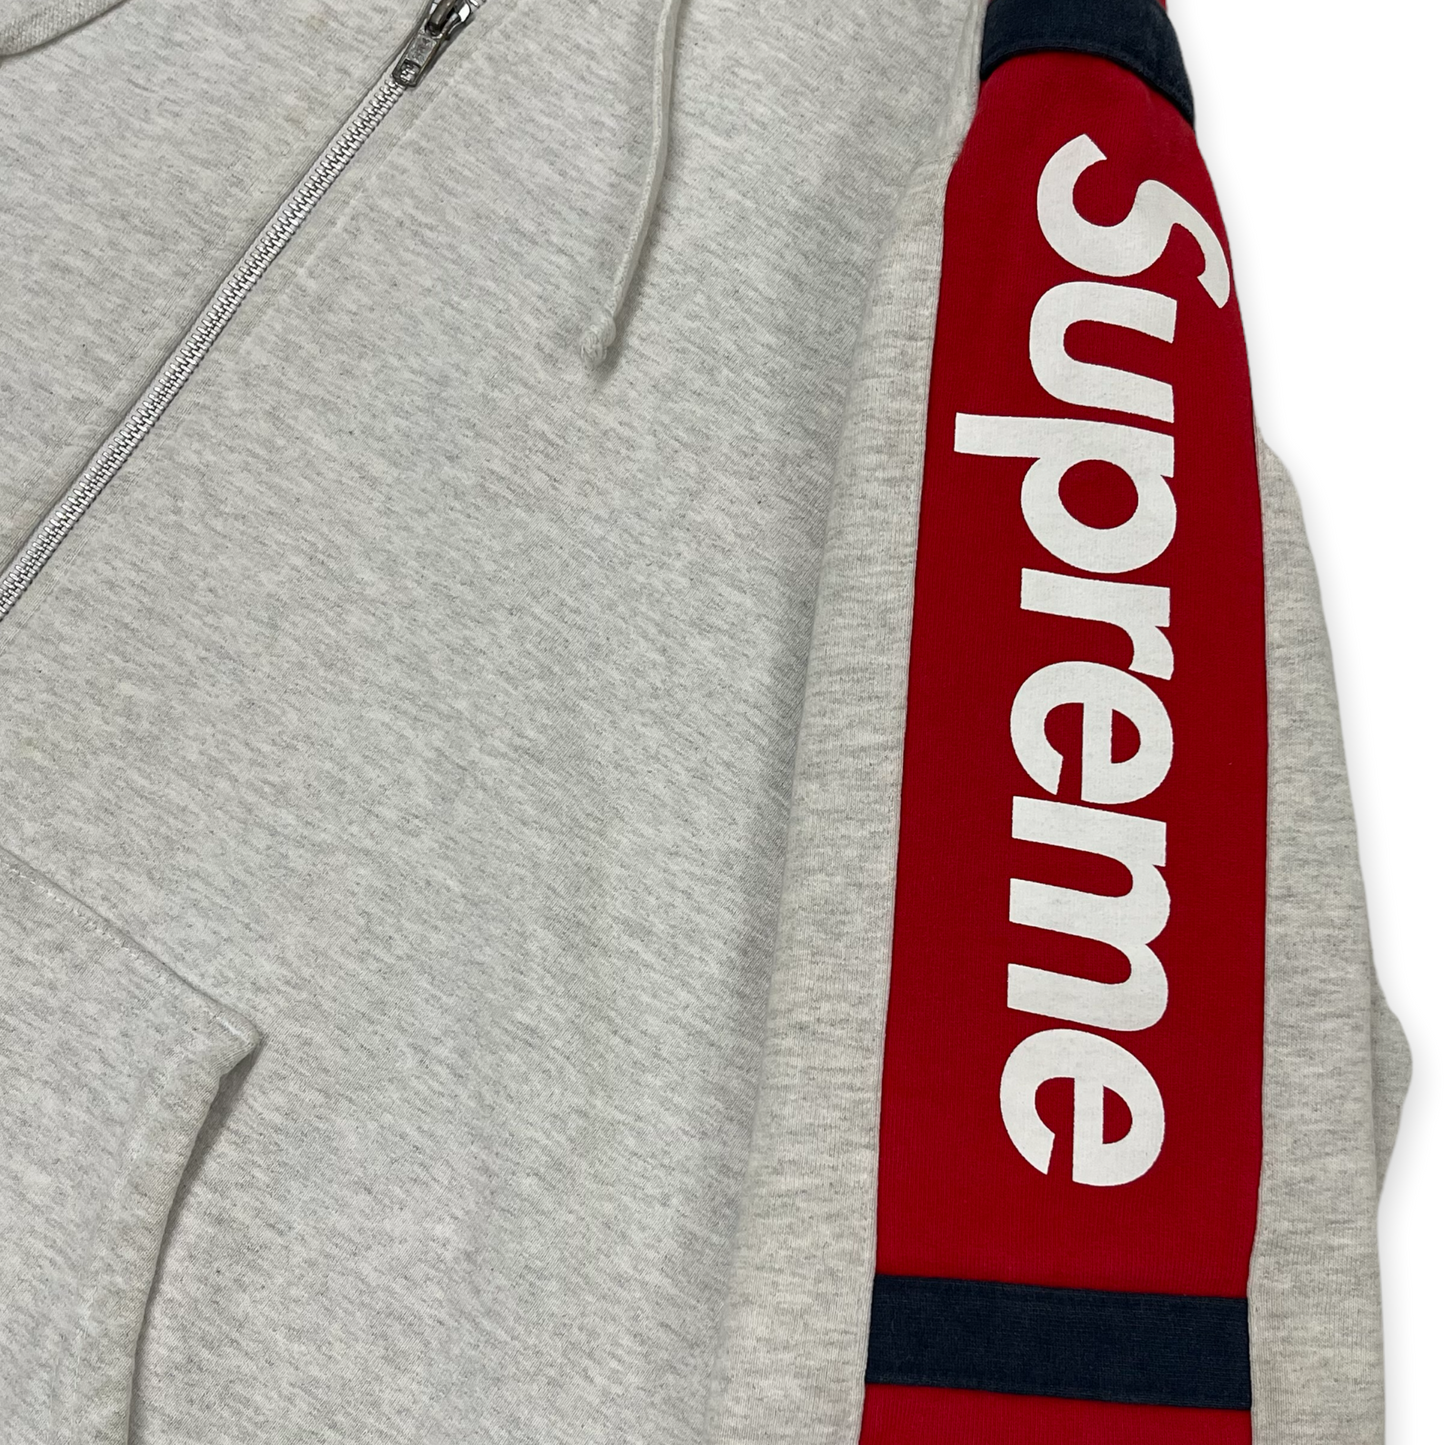 Supreme Hooded Track Zip Up Sweater FW15 Size Large